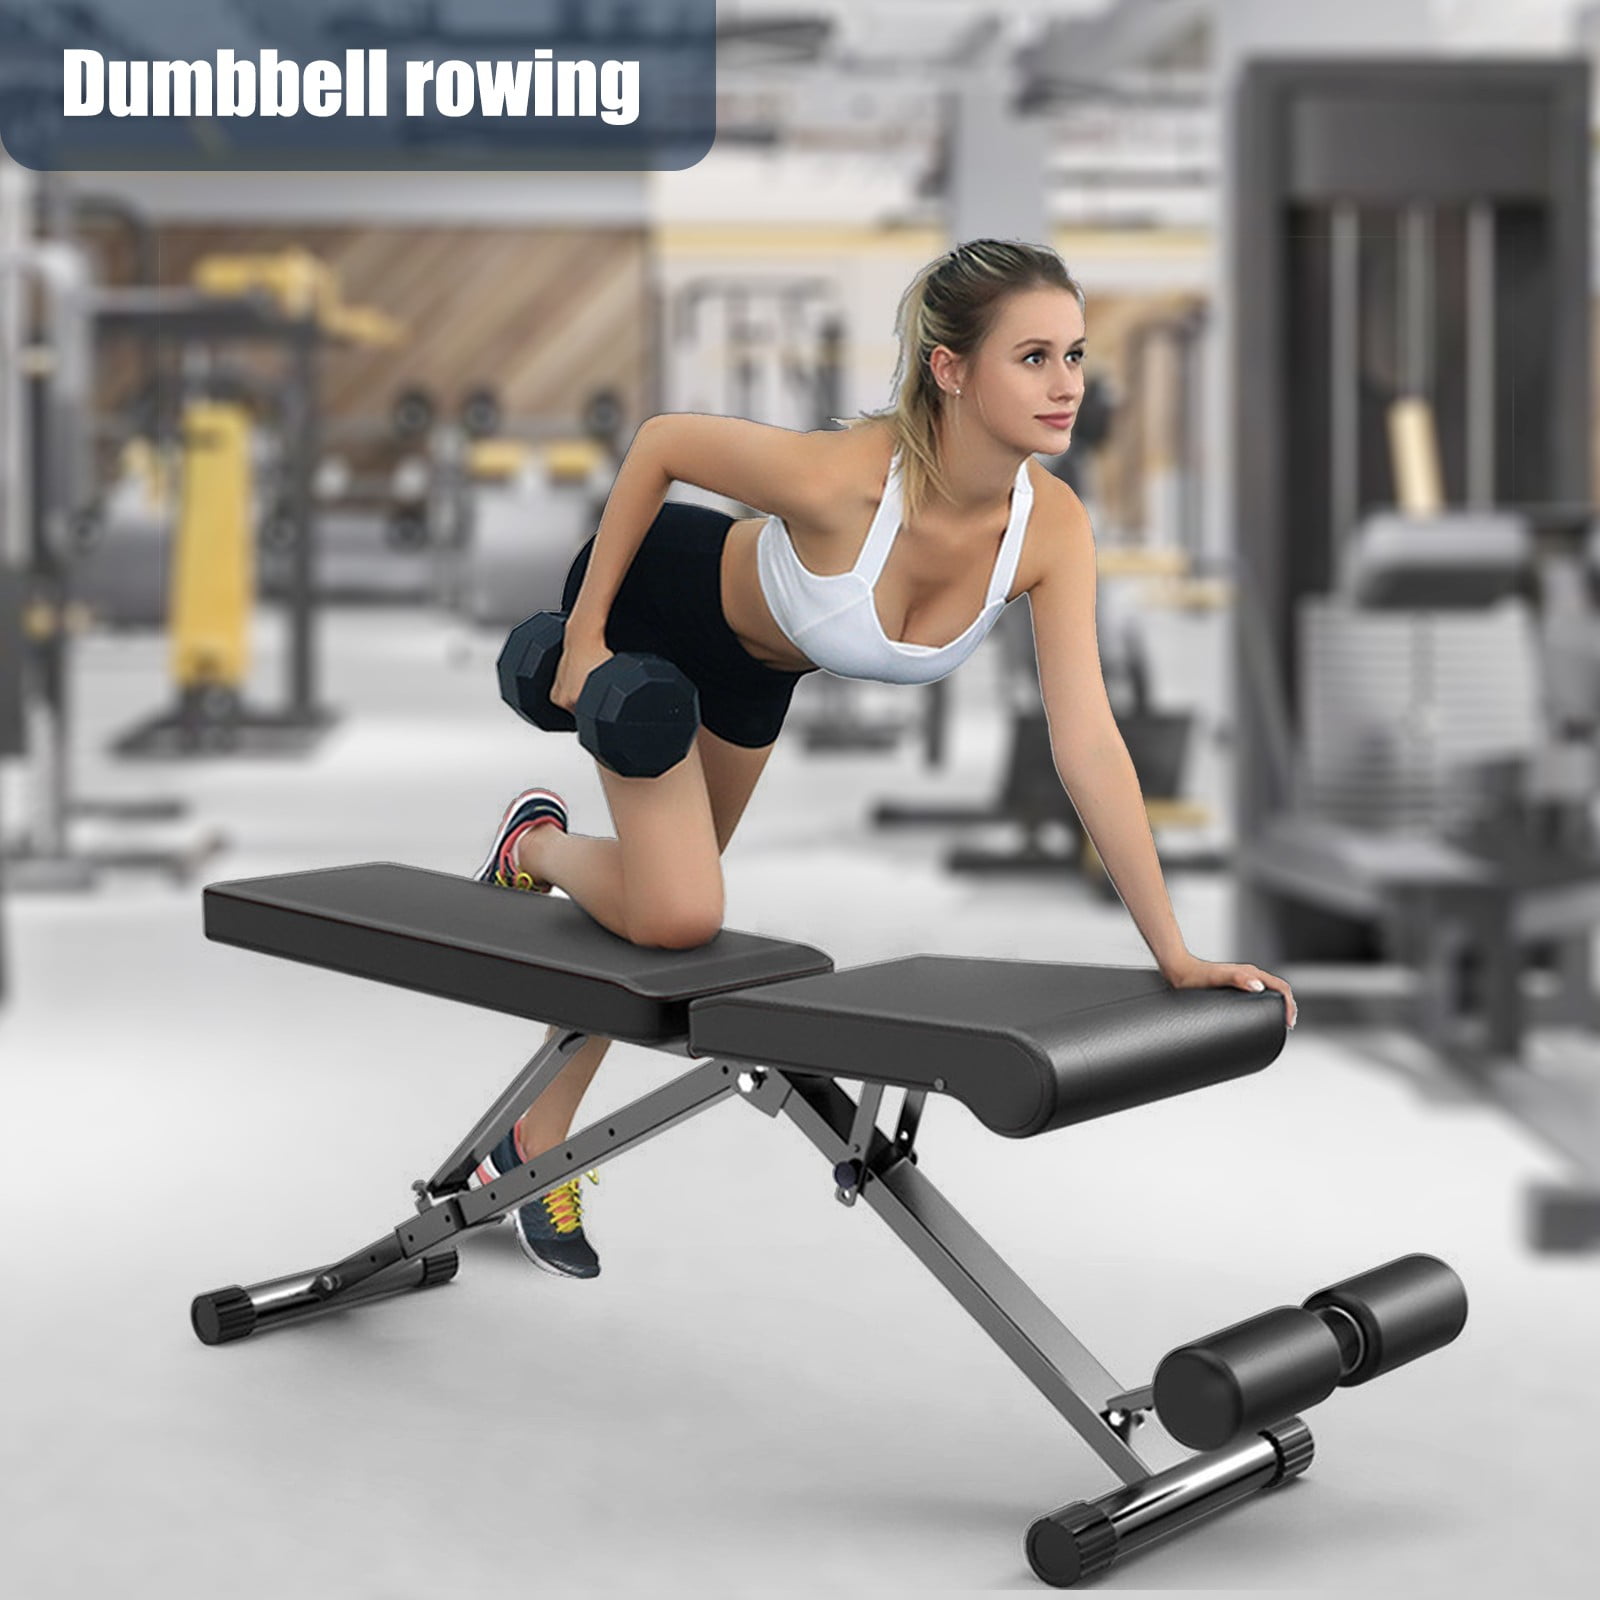 Multi-Workout Bench Decline Sit Up Bench Crunch Board Fitness Home Gym Exercise Sport for Full Body Workout Utility Weight Bench 【US Fast Shipment】Foldable Adjustable Sit Up Bench 